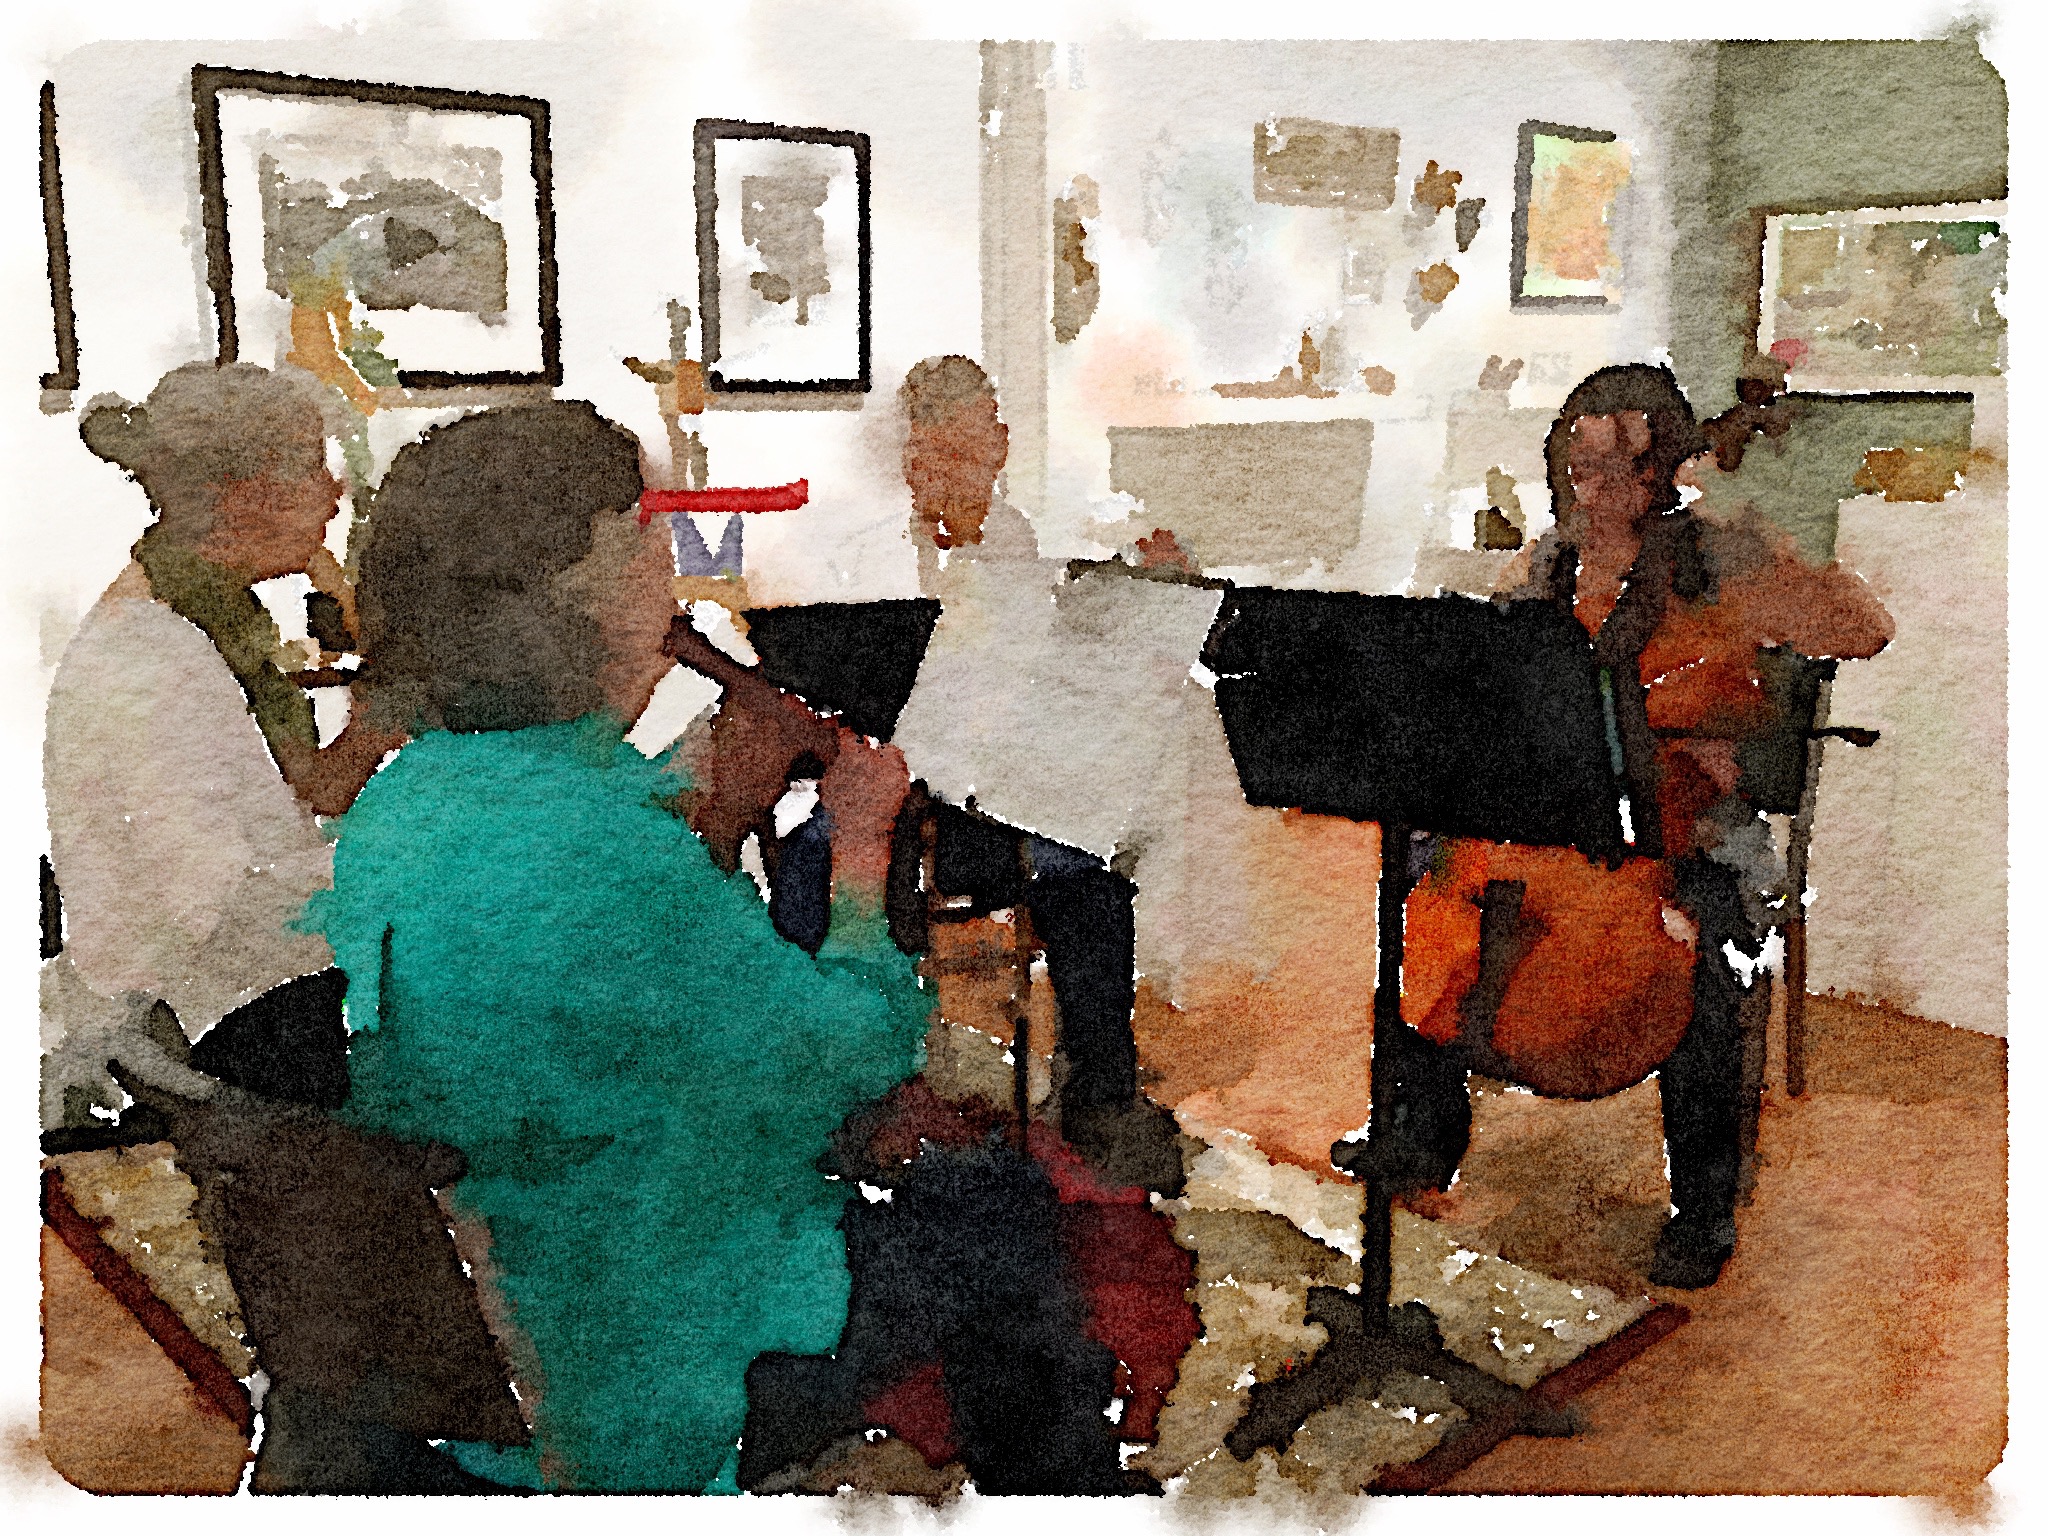 Queen City Consort at 1+1=1 Gallery on March 4, 2016